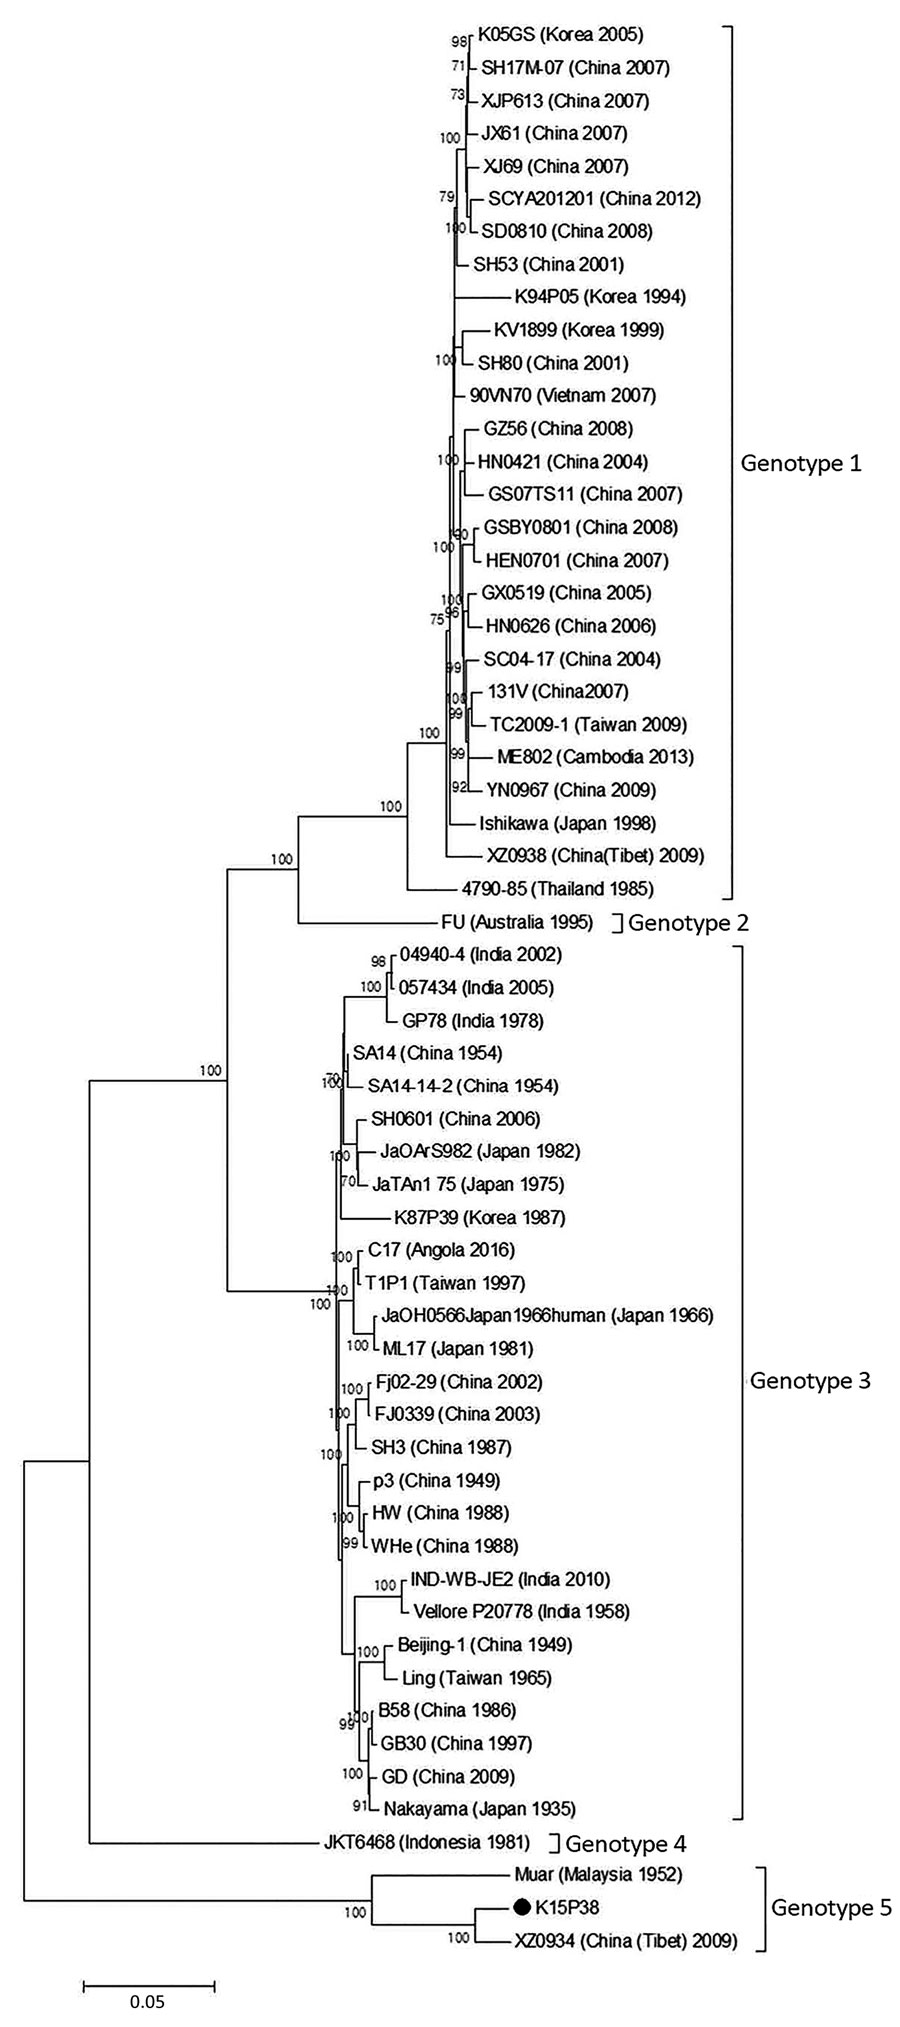 Phylogenetic tree of Japanese encephalitis virus genotypes 1–5, South Korea. Entire open reading frame is shown. Bootstrap probabilities (values along branches) of each node were calculated by using 1,000 replicates. Branches showing quartet puzzling reliability &gt;70% can be considered well supported. Black circle indicates K15P38 strain from patient samples. Scale bar indicates nucleotide substitutions per site.